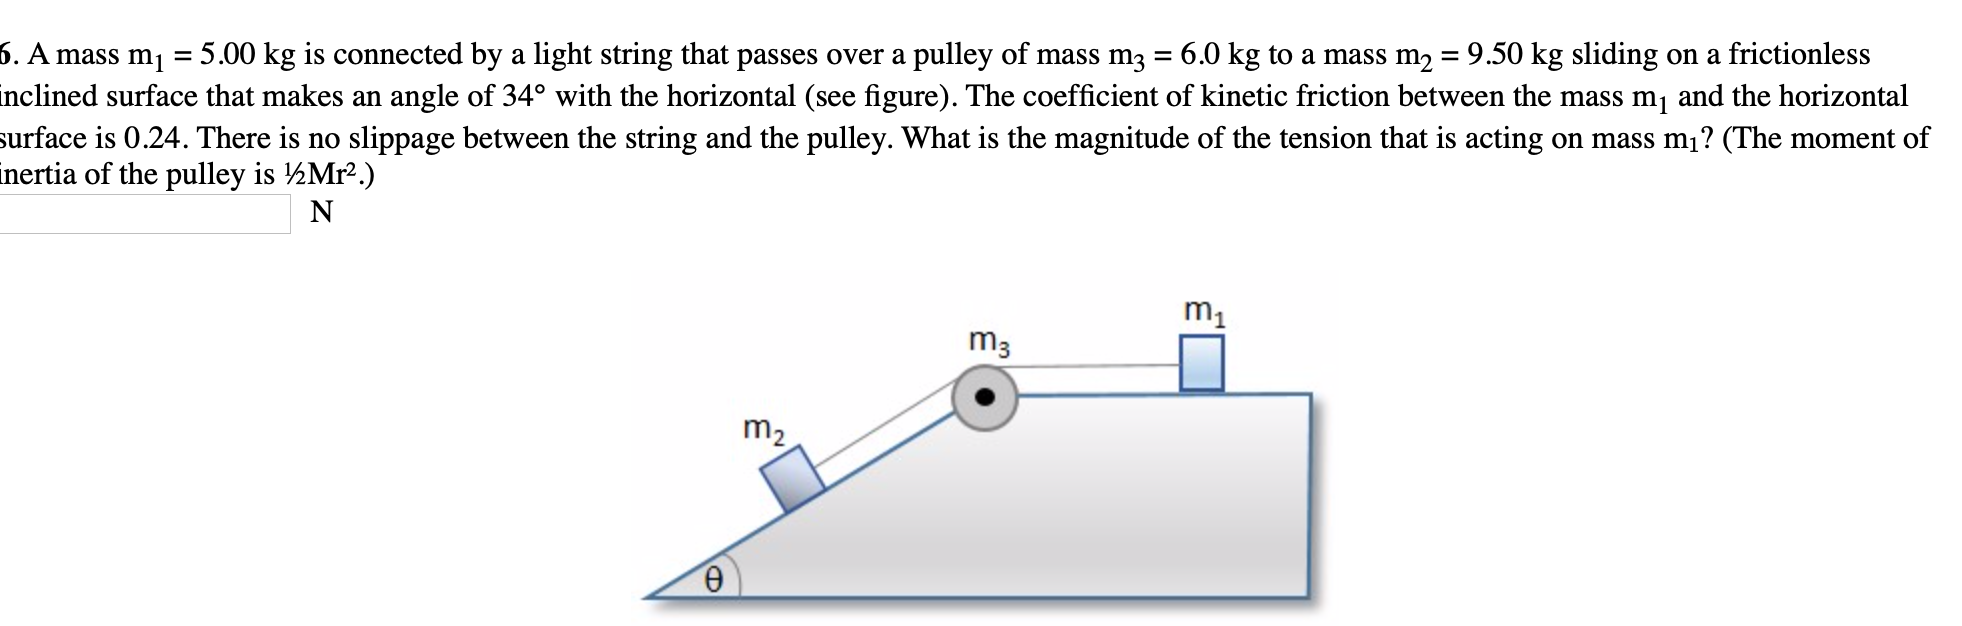 6. A mass m1
5.00 kg is connected by a light string that passes over a pulley of mass m3 = 6.0 kg to a mass m2 = 9.50 kg sliding on a frictionless
%3D
%|
inclined surface that makes an angle of 34° with the horizontal (see figure). The coefficient of kinetic friction between the mass m, and the horizontal
surface is 0.24. There is no slippage between the string and the pulley. What is the magnitude of the tension that is acting on mass m1? (The moment of
inertia of the pulley is ½Mr².)
N
m1
m3
m2
Ө
